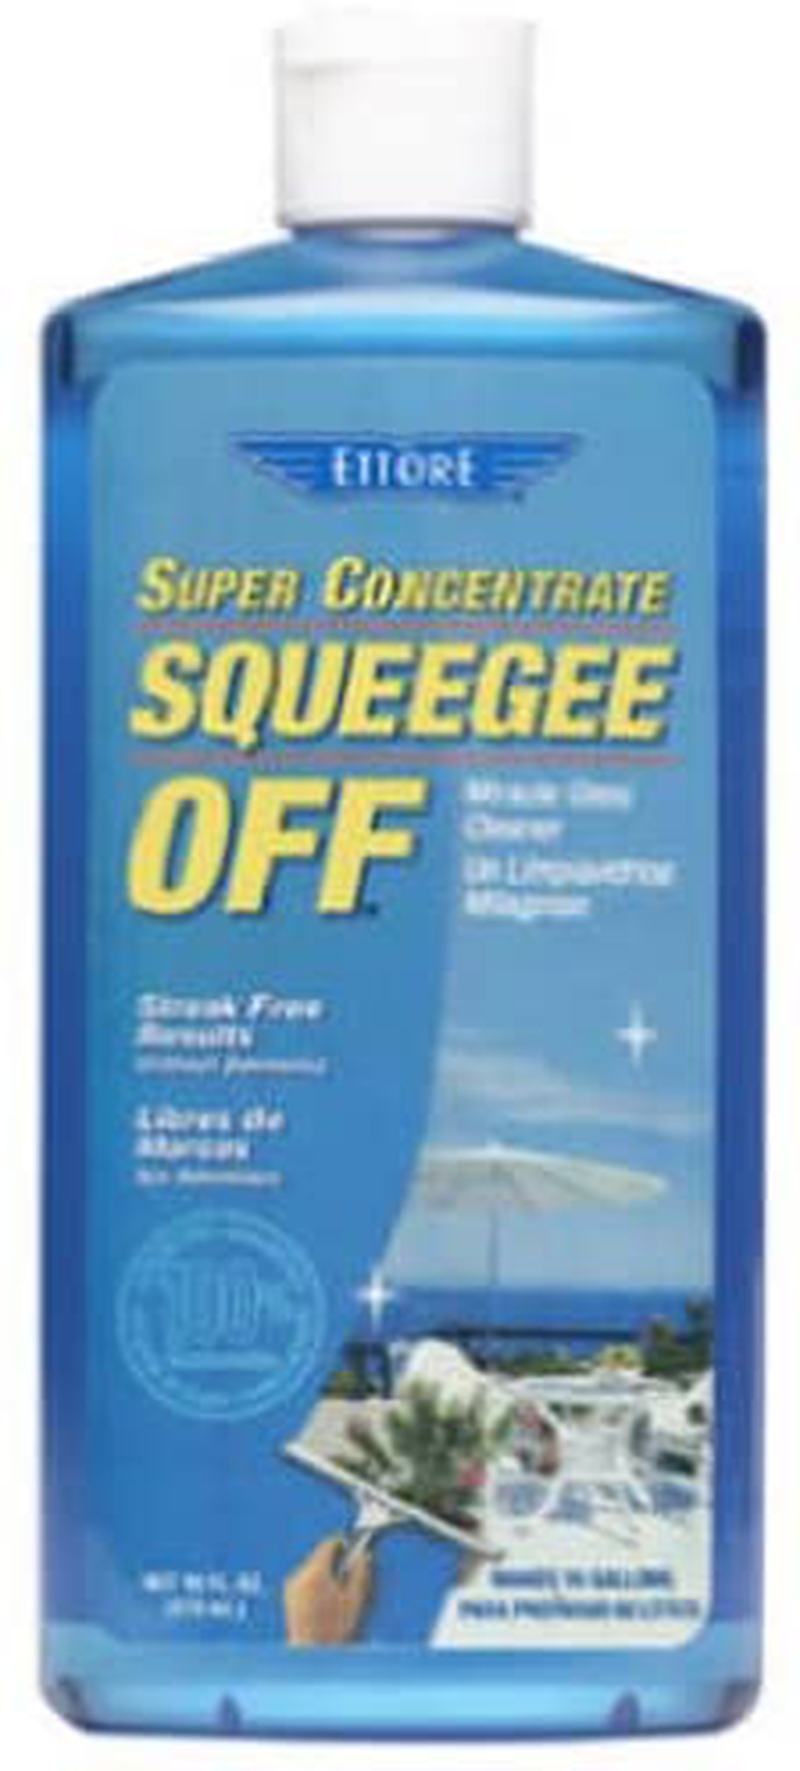 Ettore 30116 Squeegee-Off Window Cleaning Soap, 16-ounces